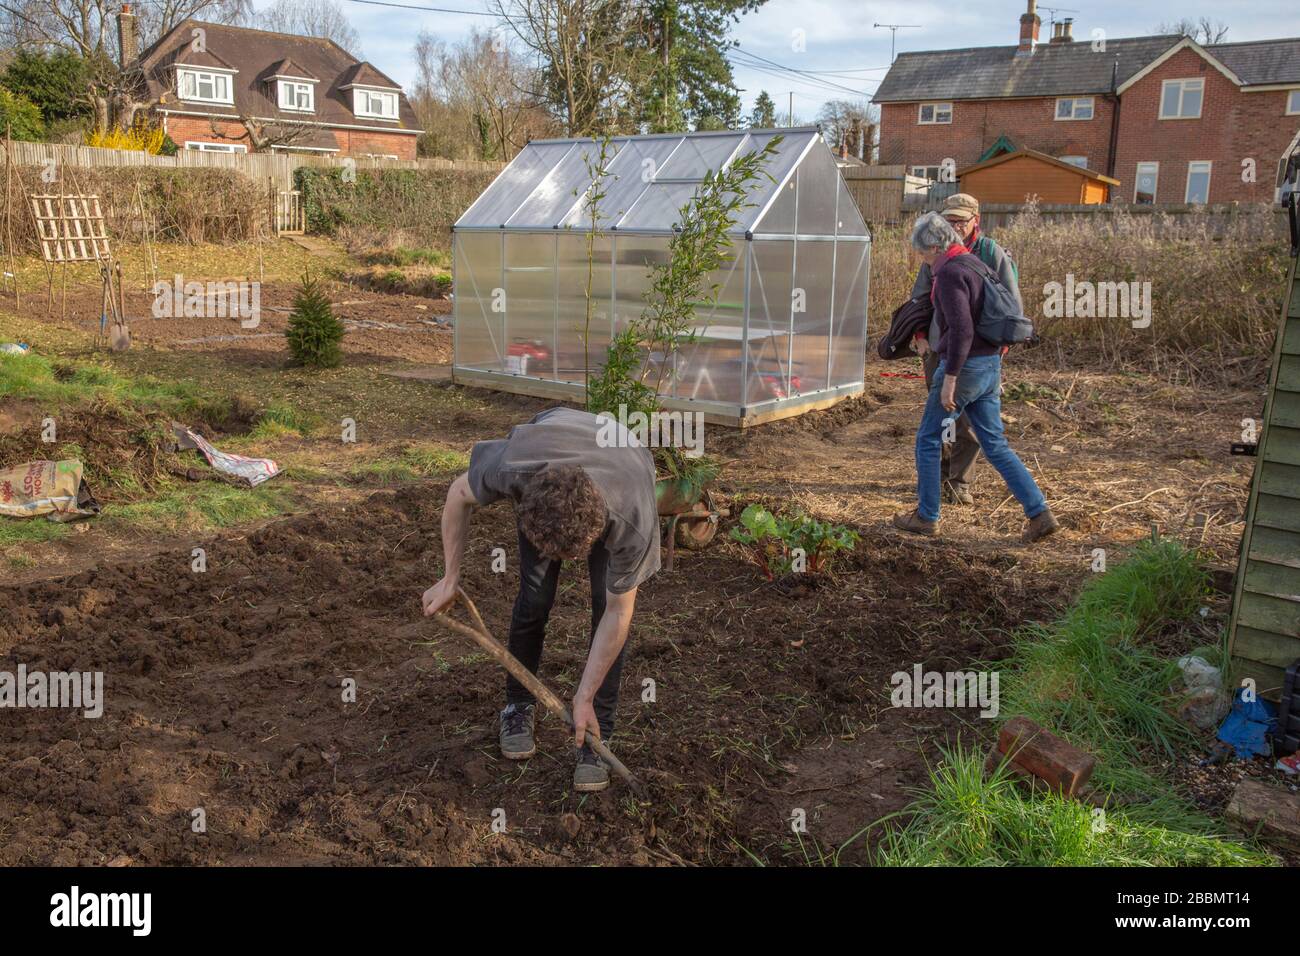 Working on a new allotment in order to grow their own food and stay healthy Stock Photo